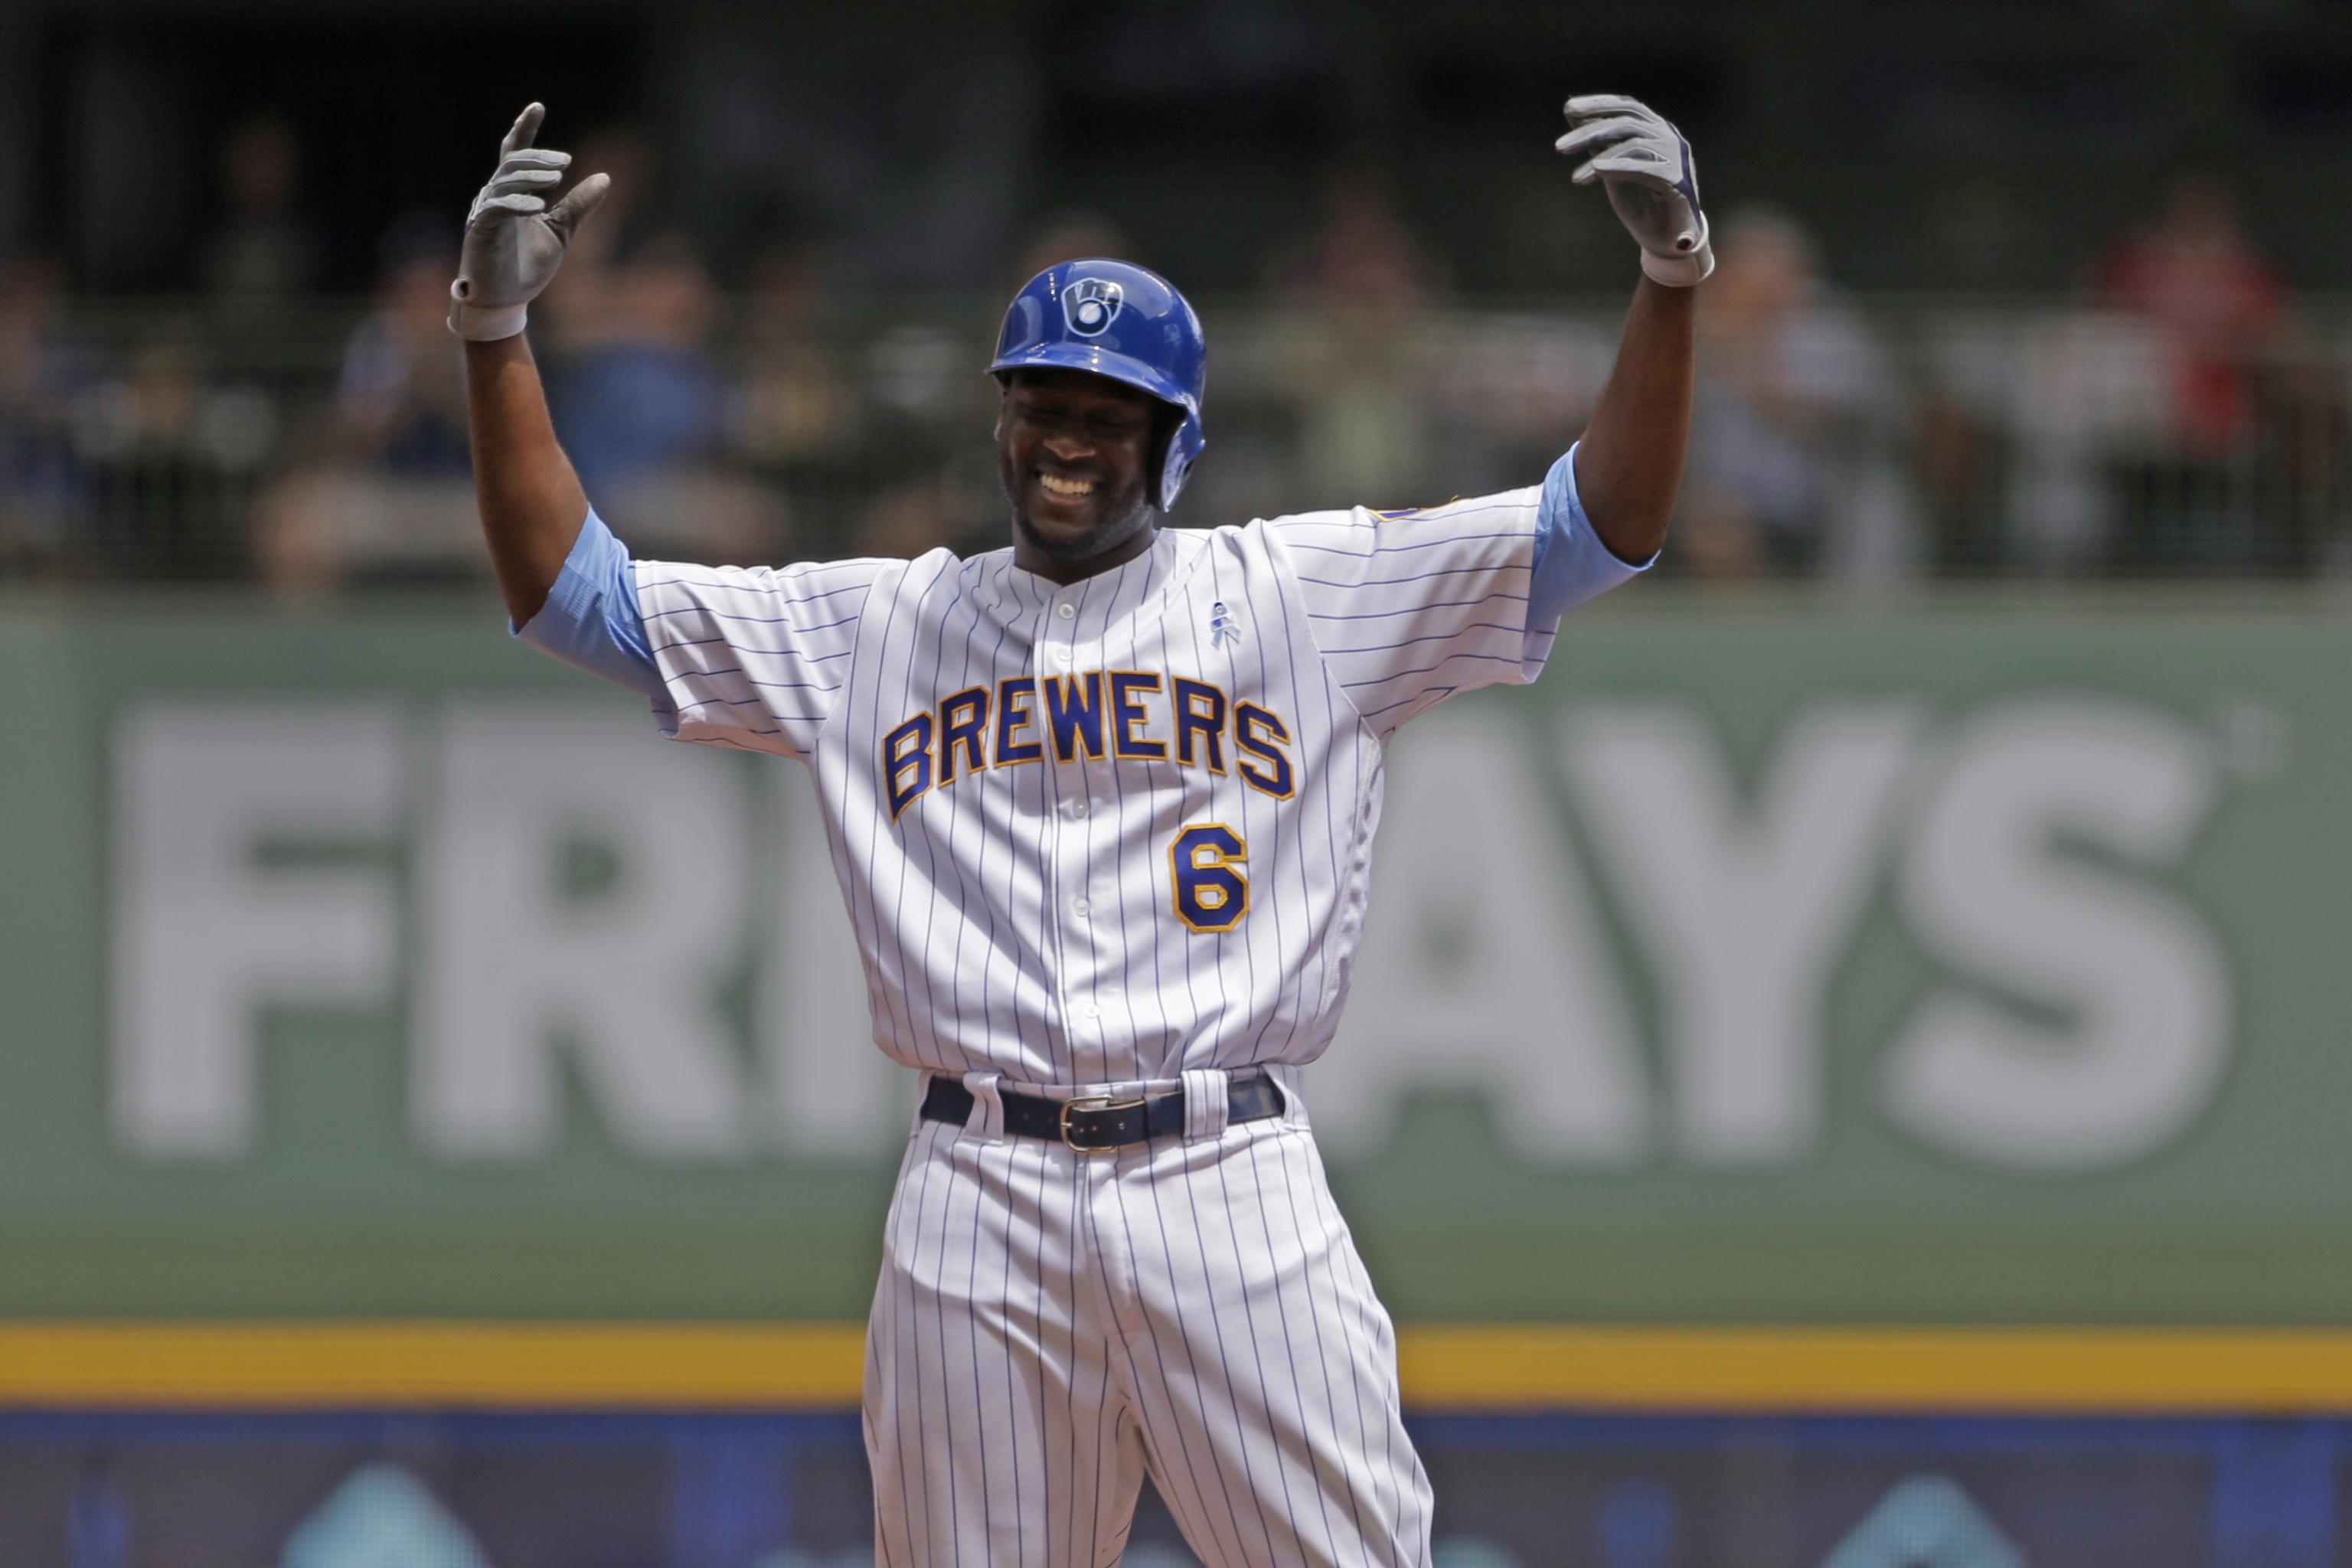 Milwaukee Brewers' center fielder Lorenzo Cain celebrates after hitting a double at Miller Park.